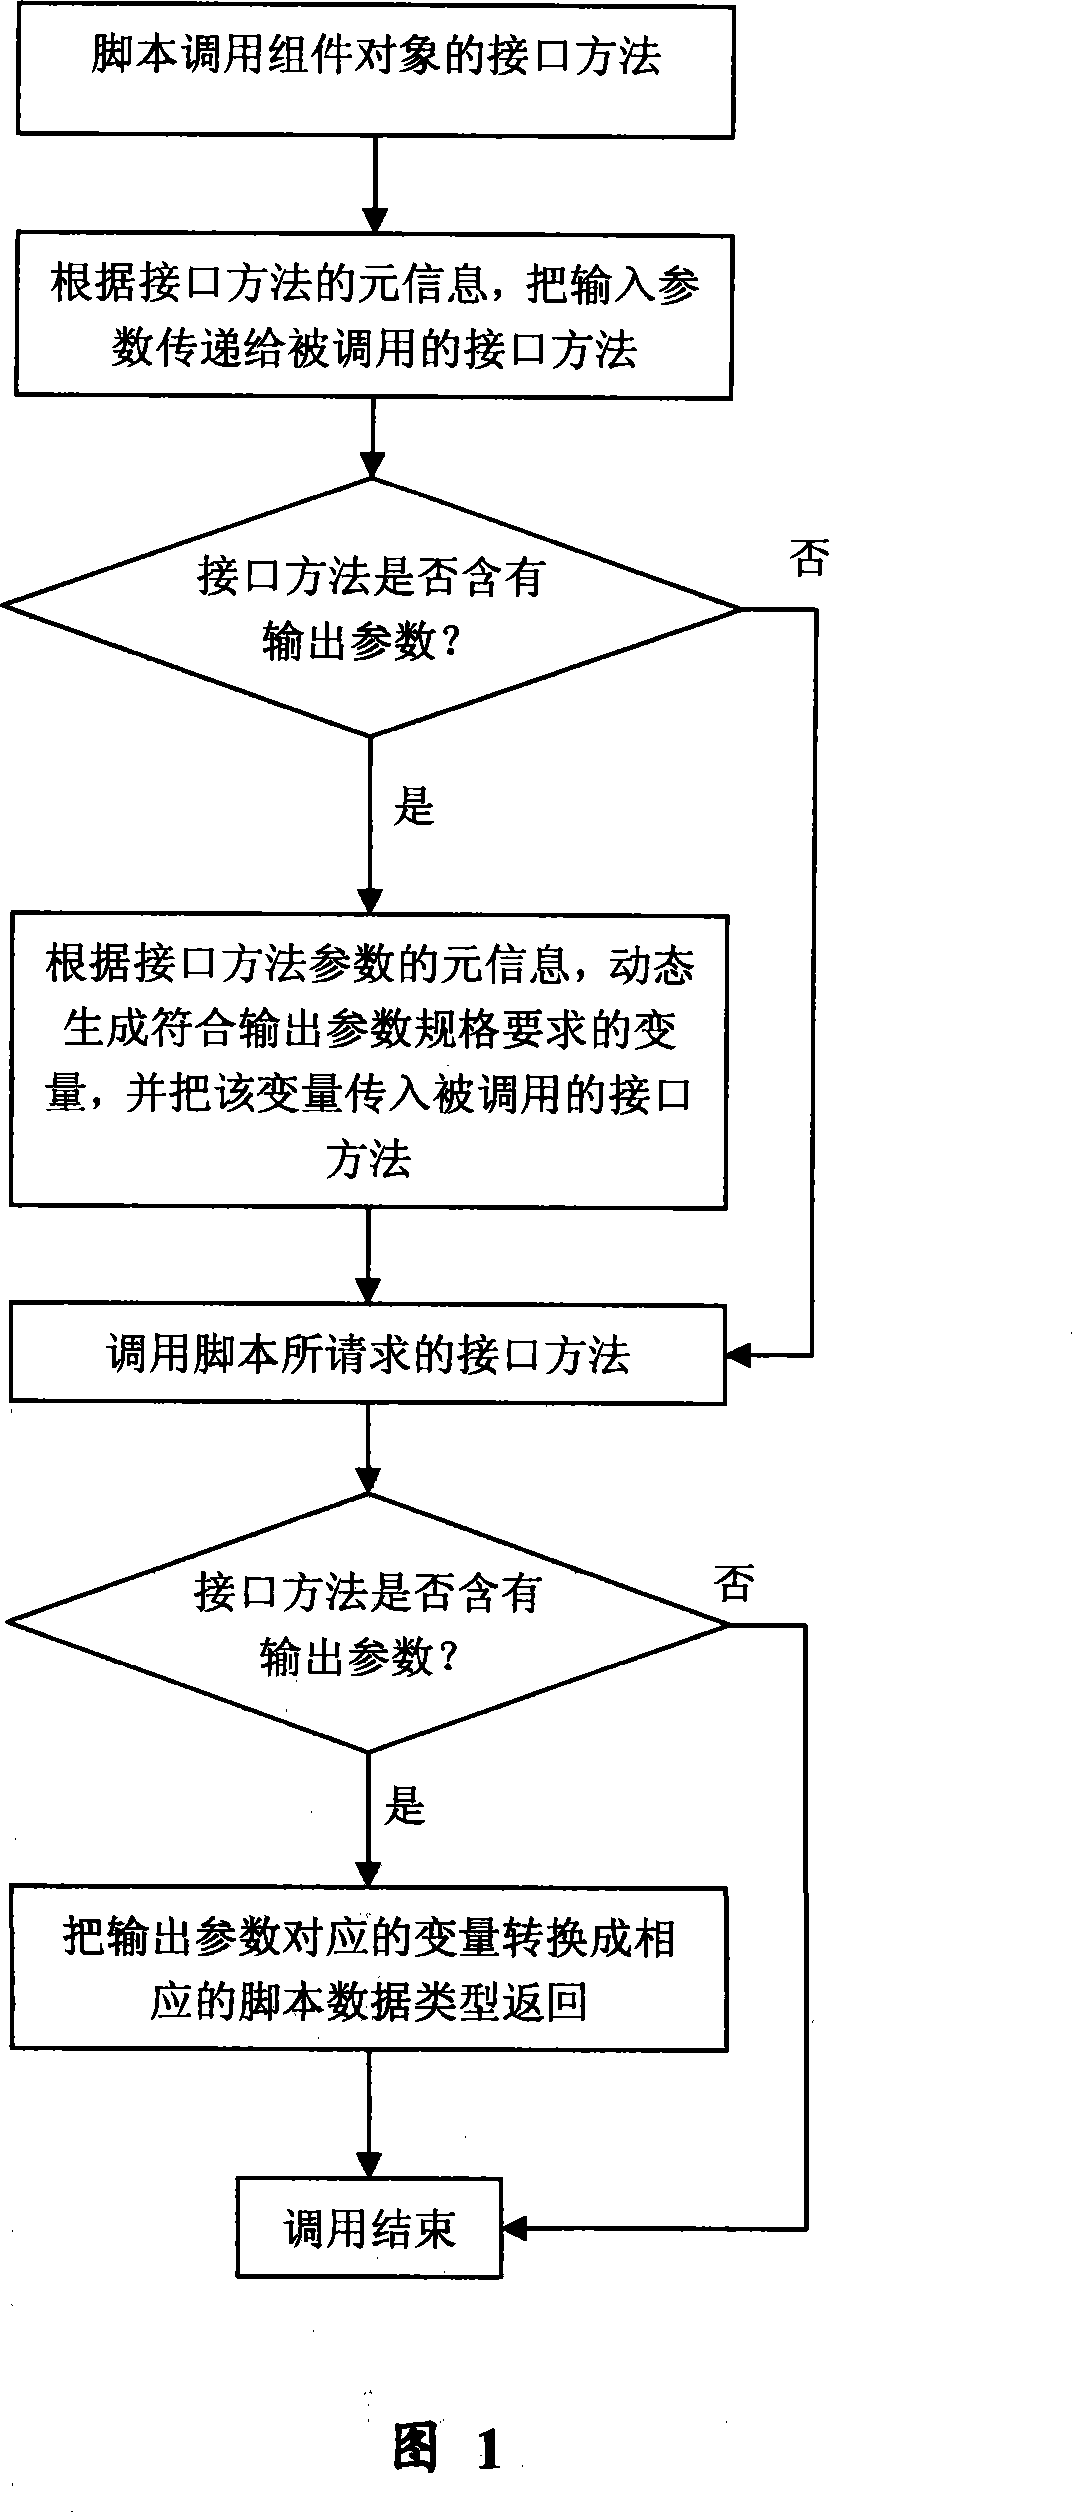 Method for script language calling multiple output parameter interface by component software system